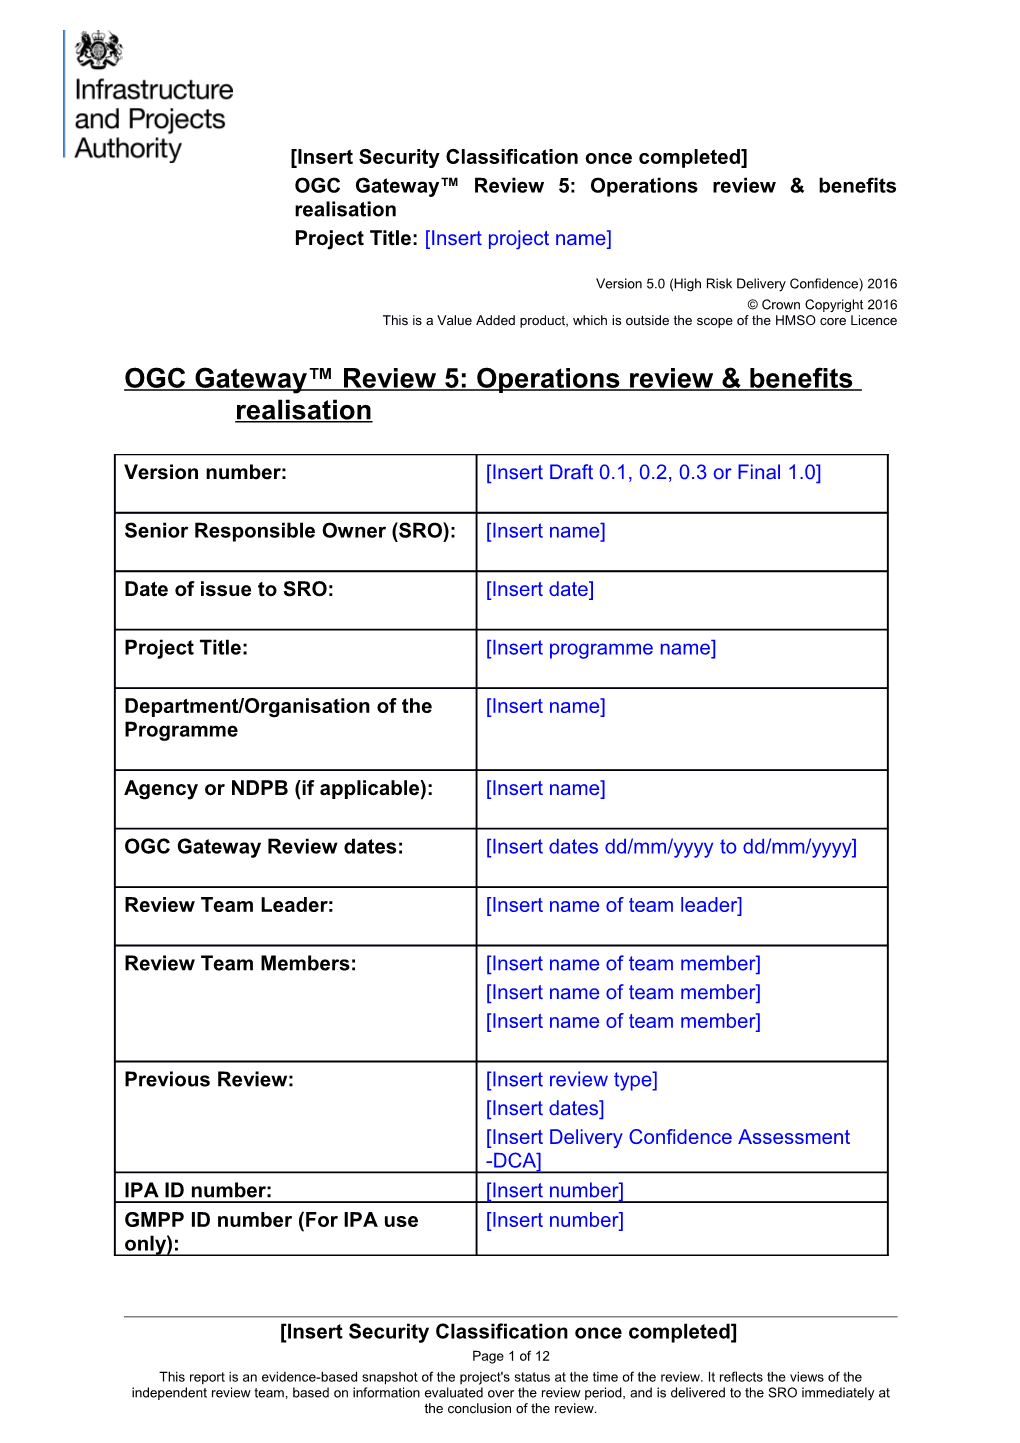 OGC Gateway Review 5: Operations Review & Benefits Realisation